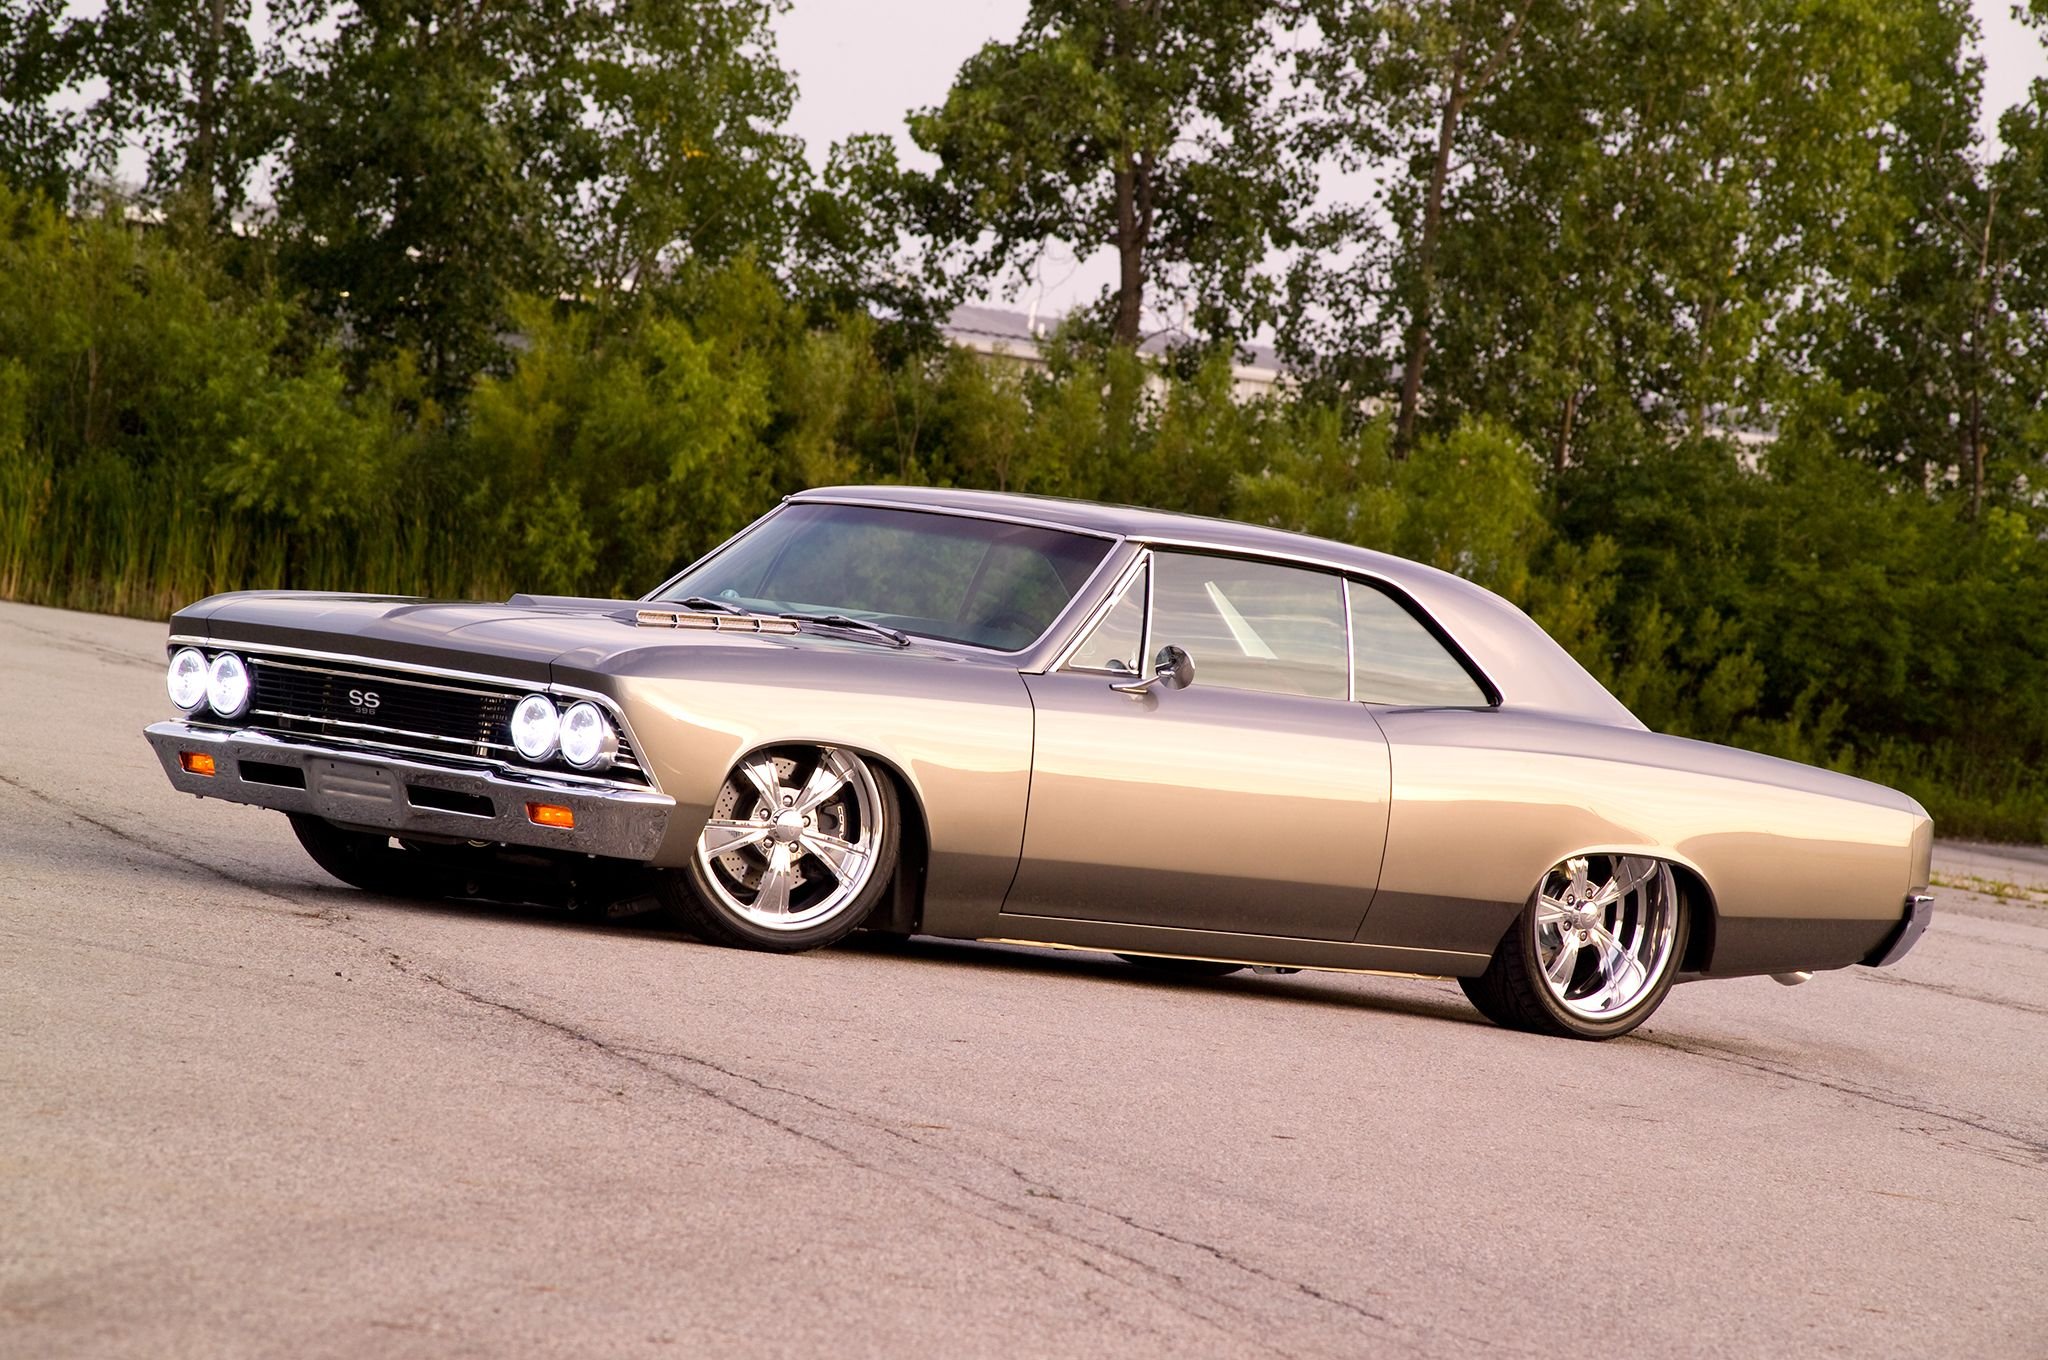 1966, Pro, Touring, 396, Chevelle, S s, Muscle, Classic, Hot, Rod, Rods, Hotrod, Custom, Chevy, Chevrolet Wallpaper